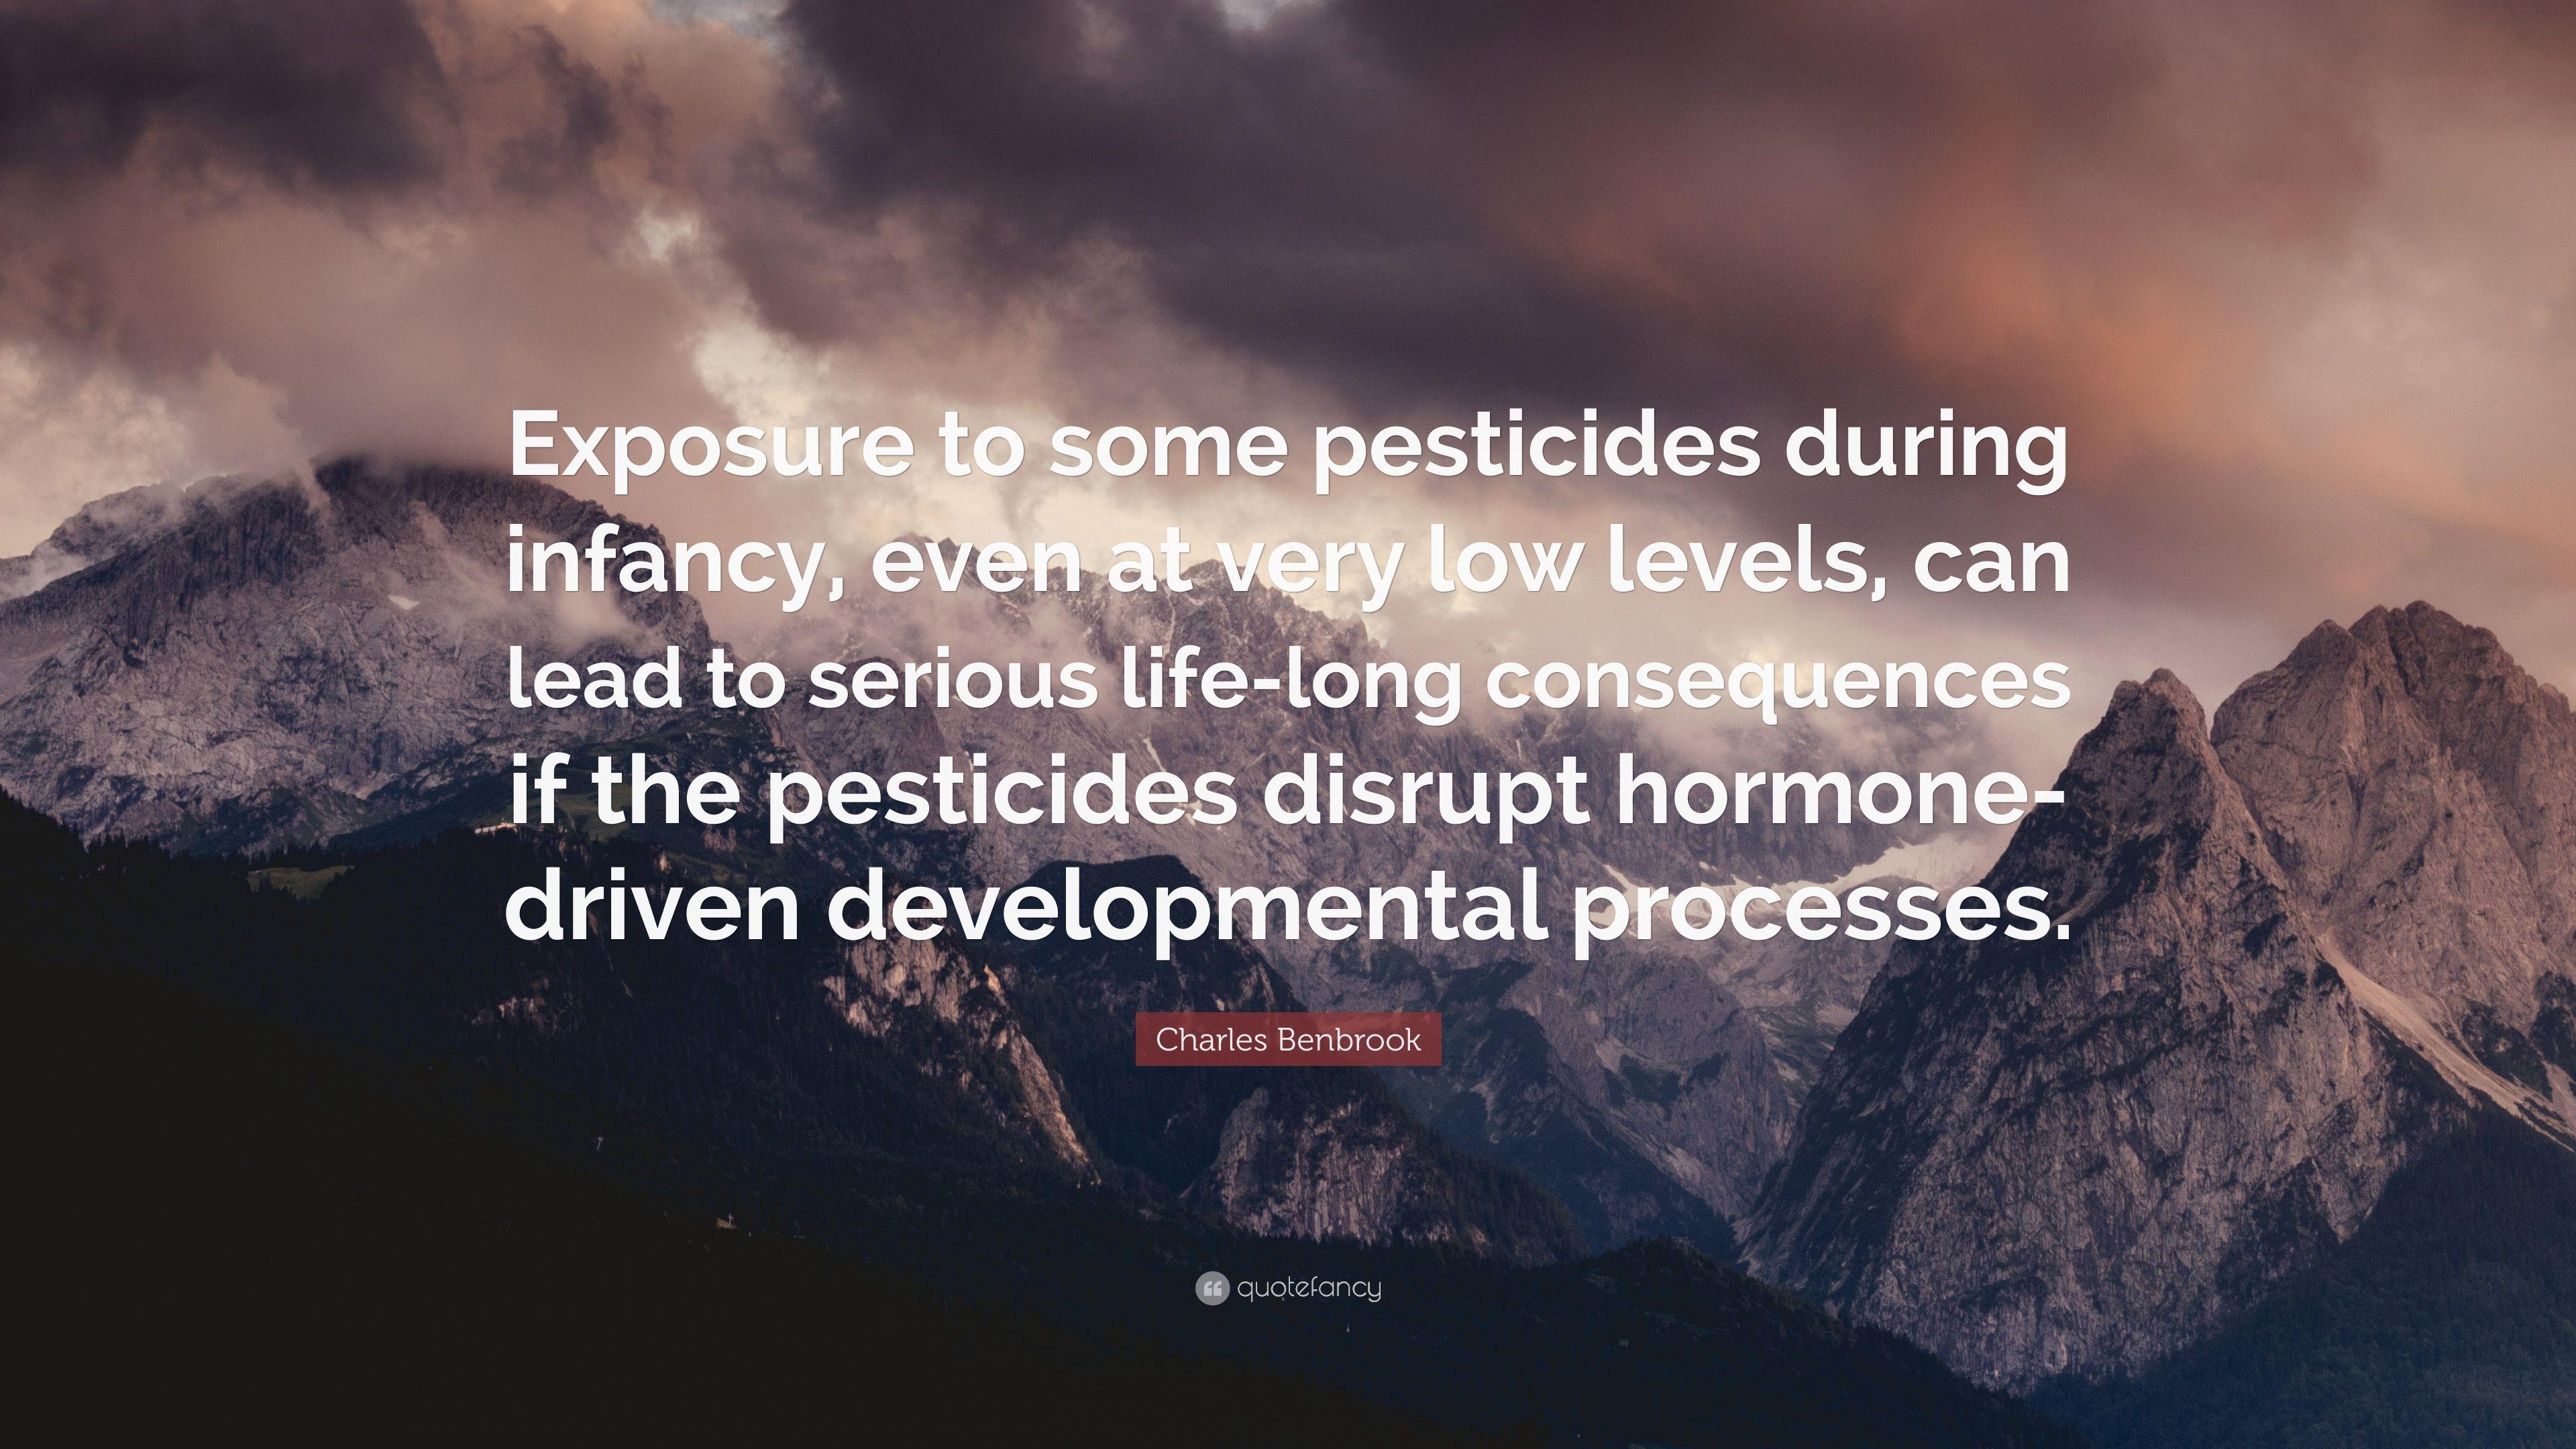 Charles Benbrook Quote: “Exposure to some pesticides during